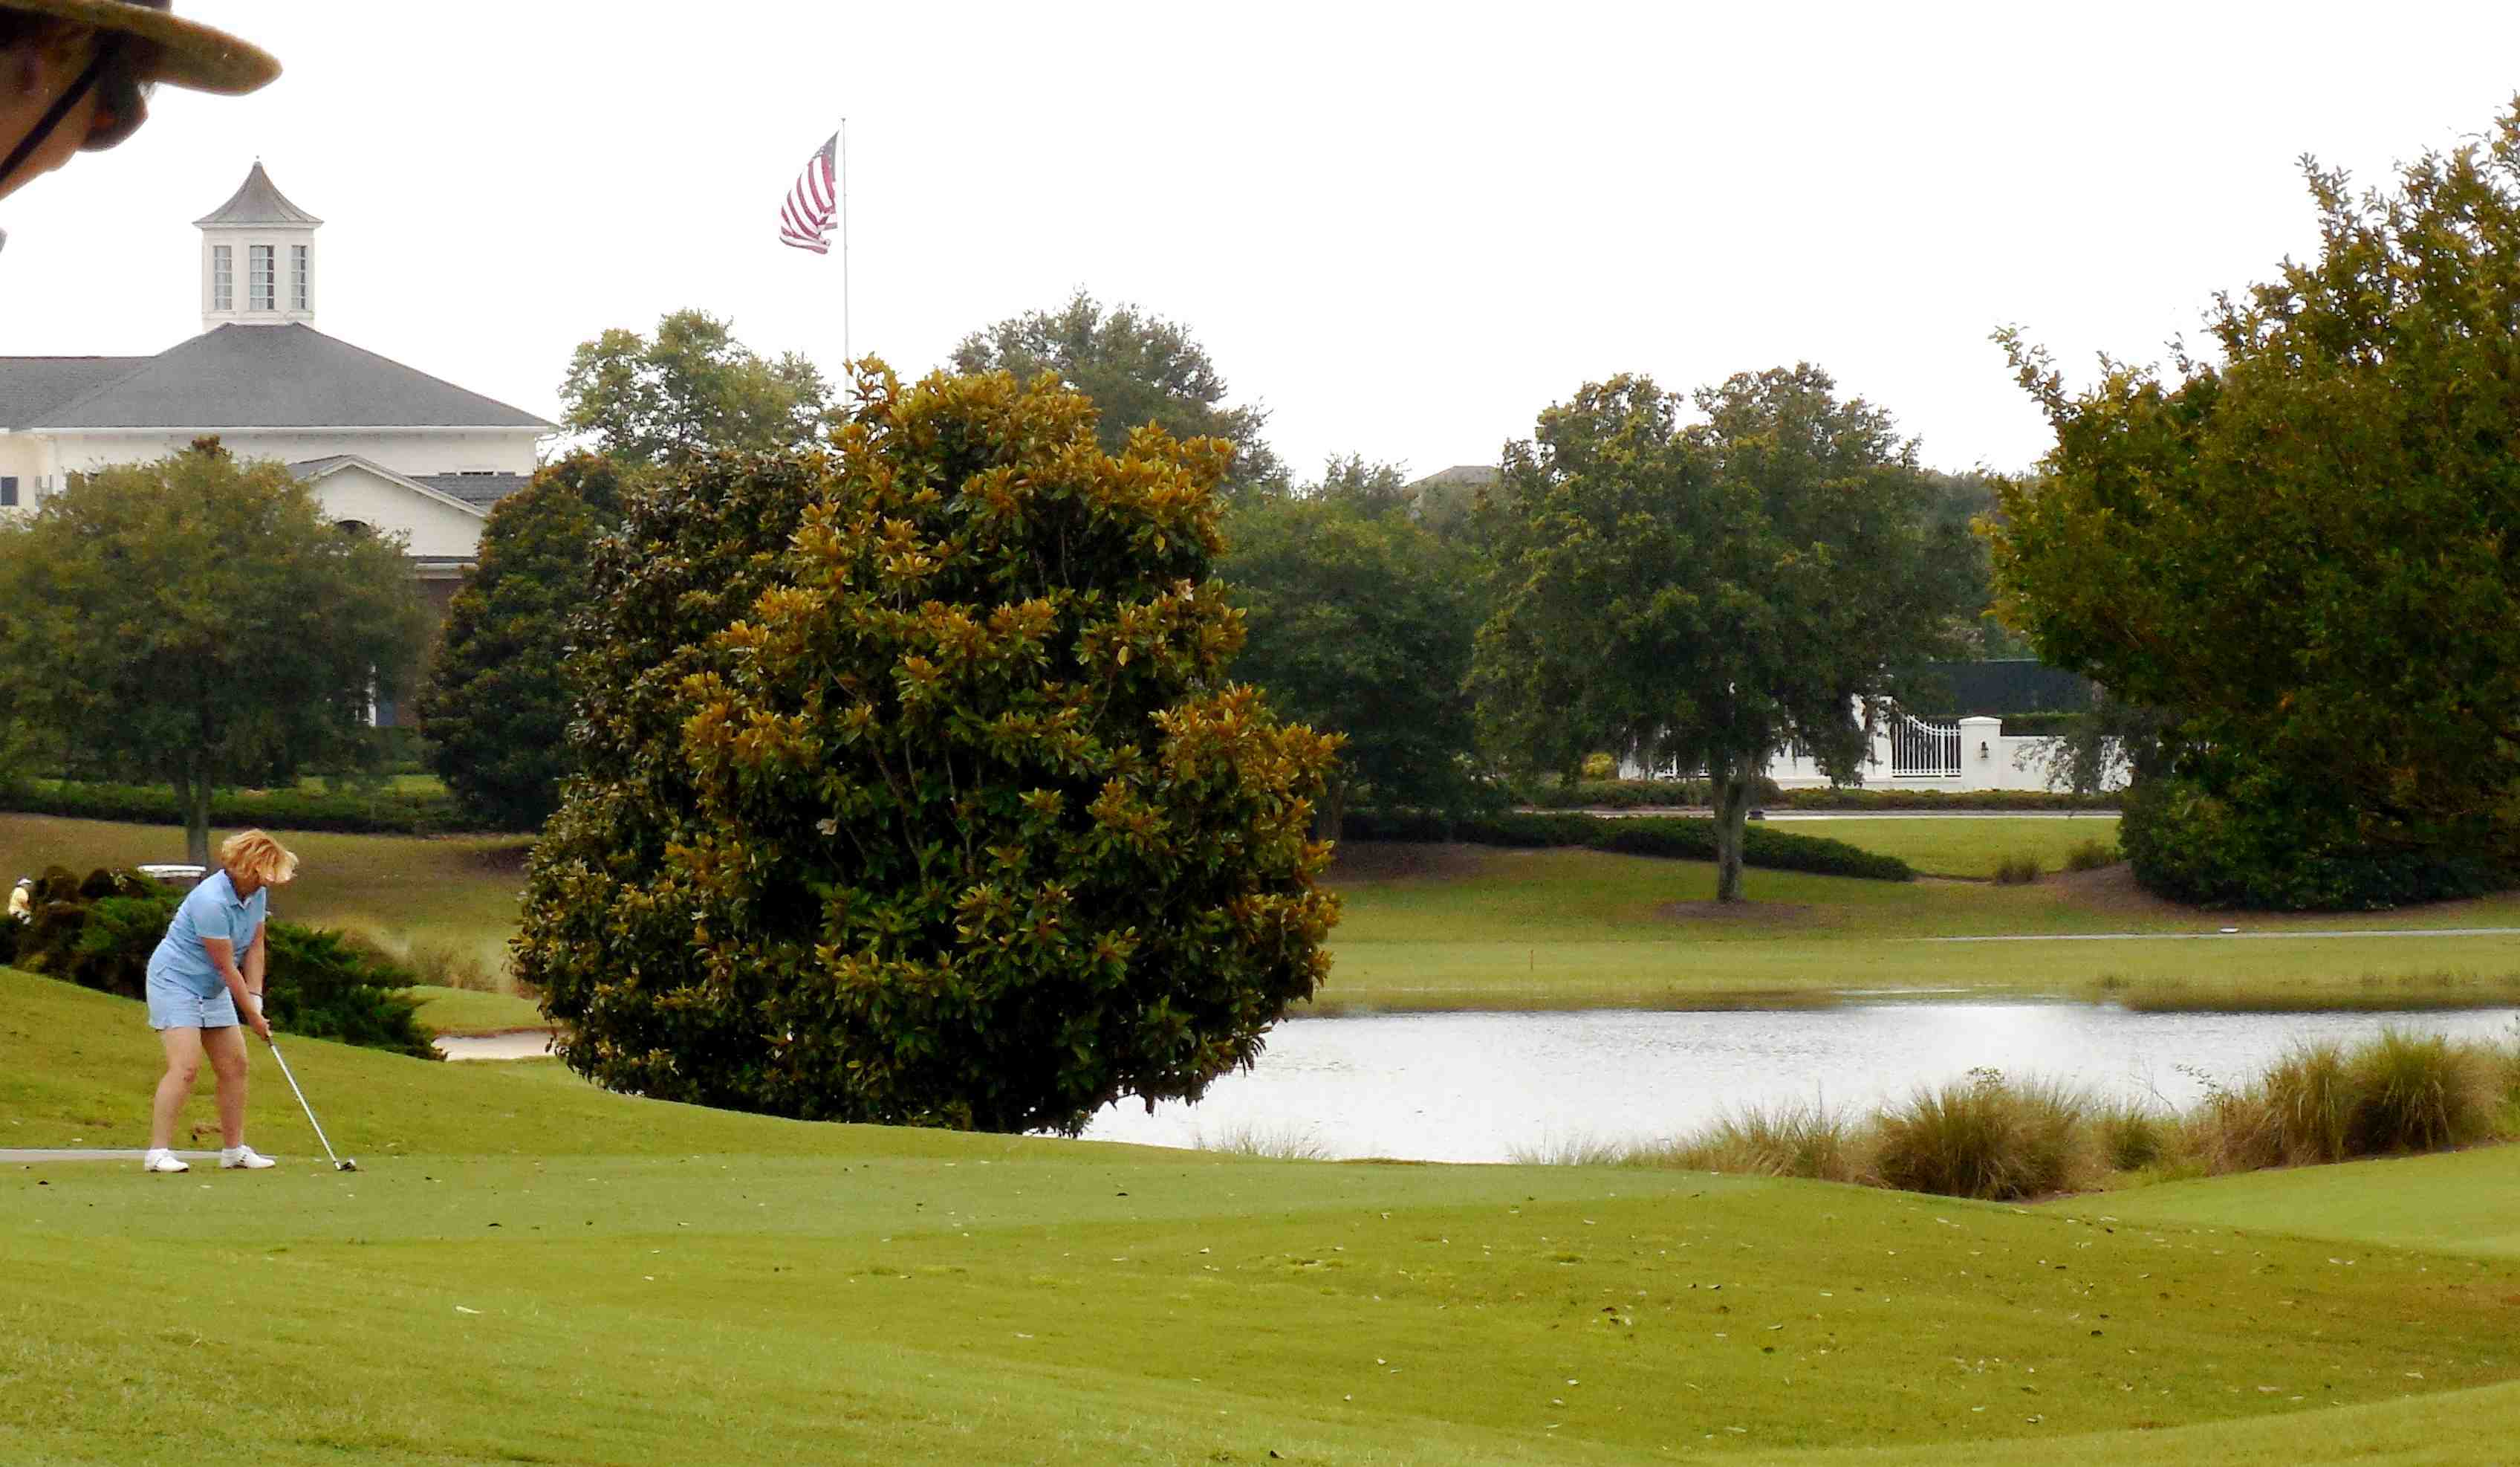 Two executive golf courses set to reopen